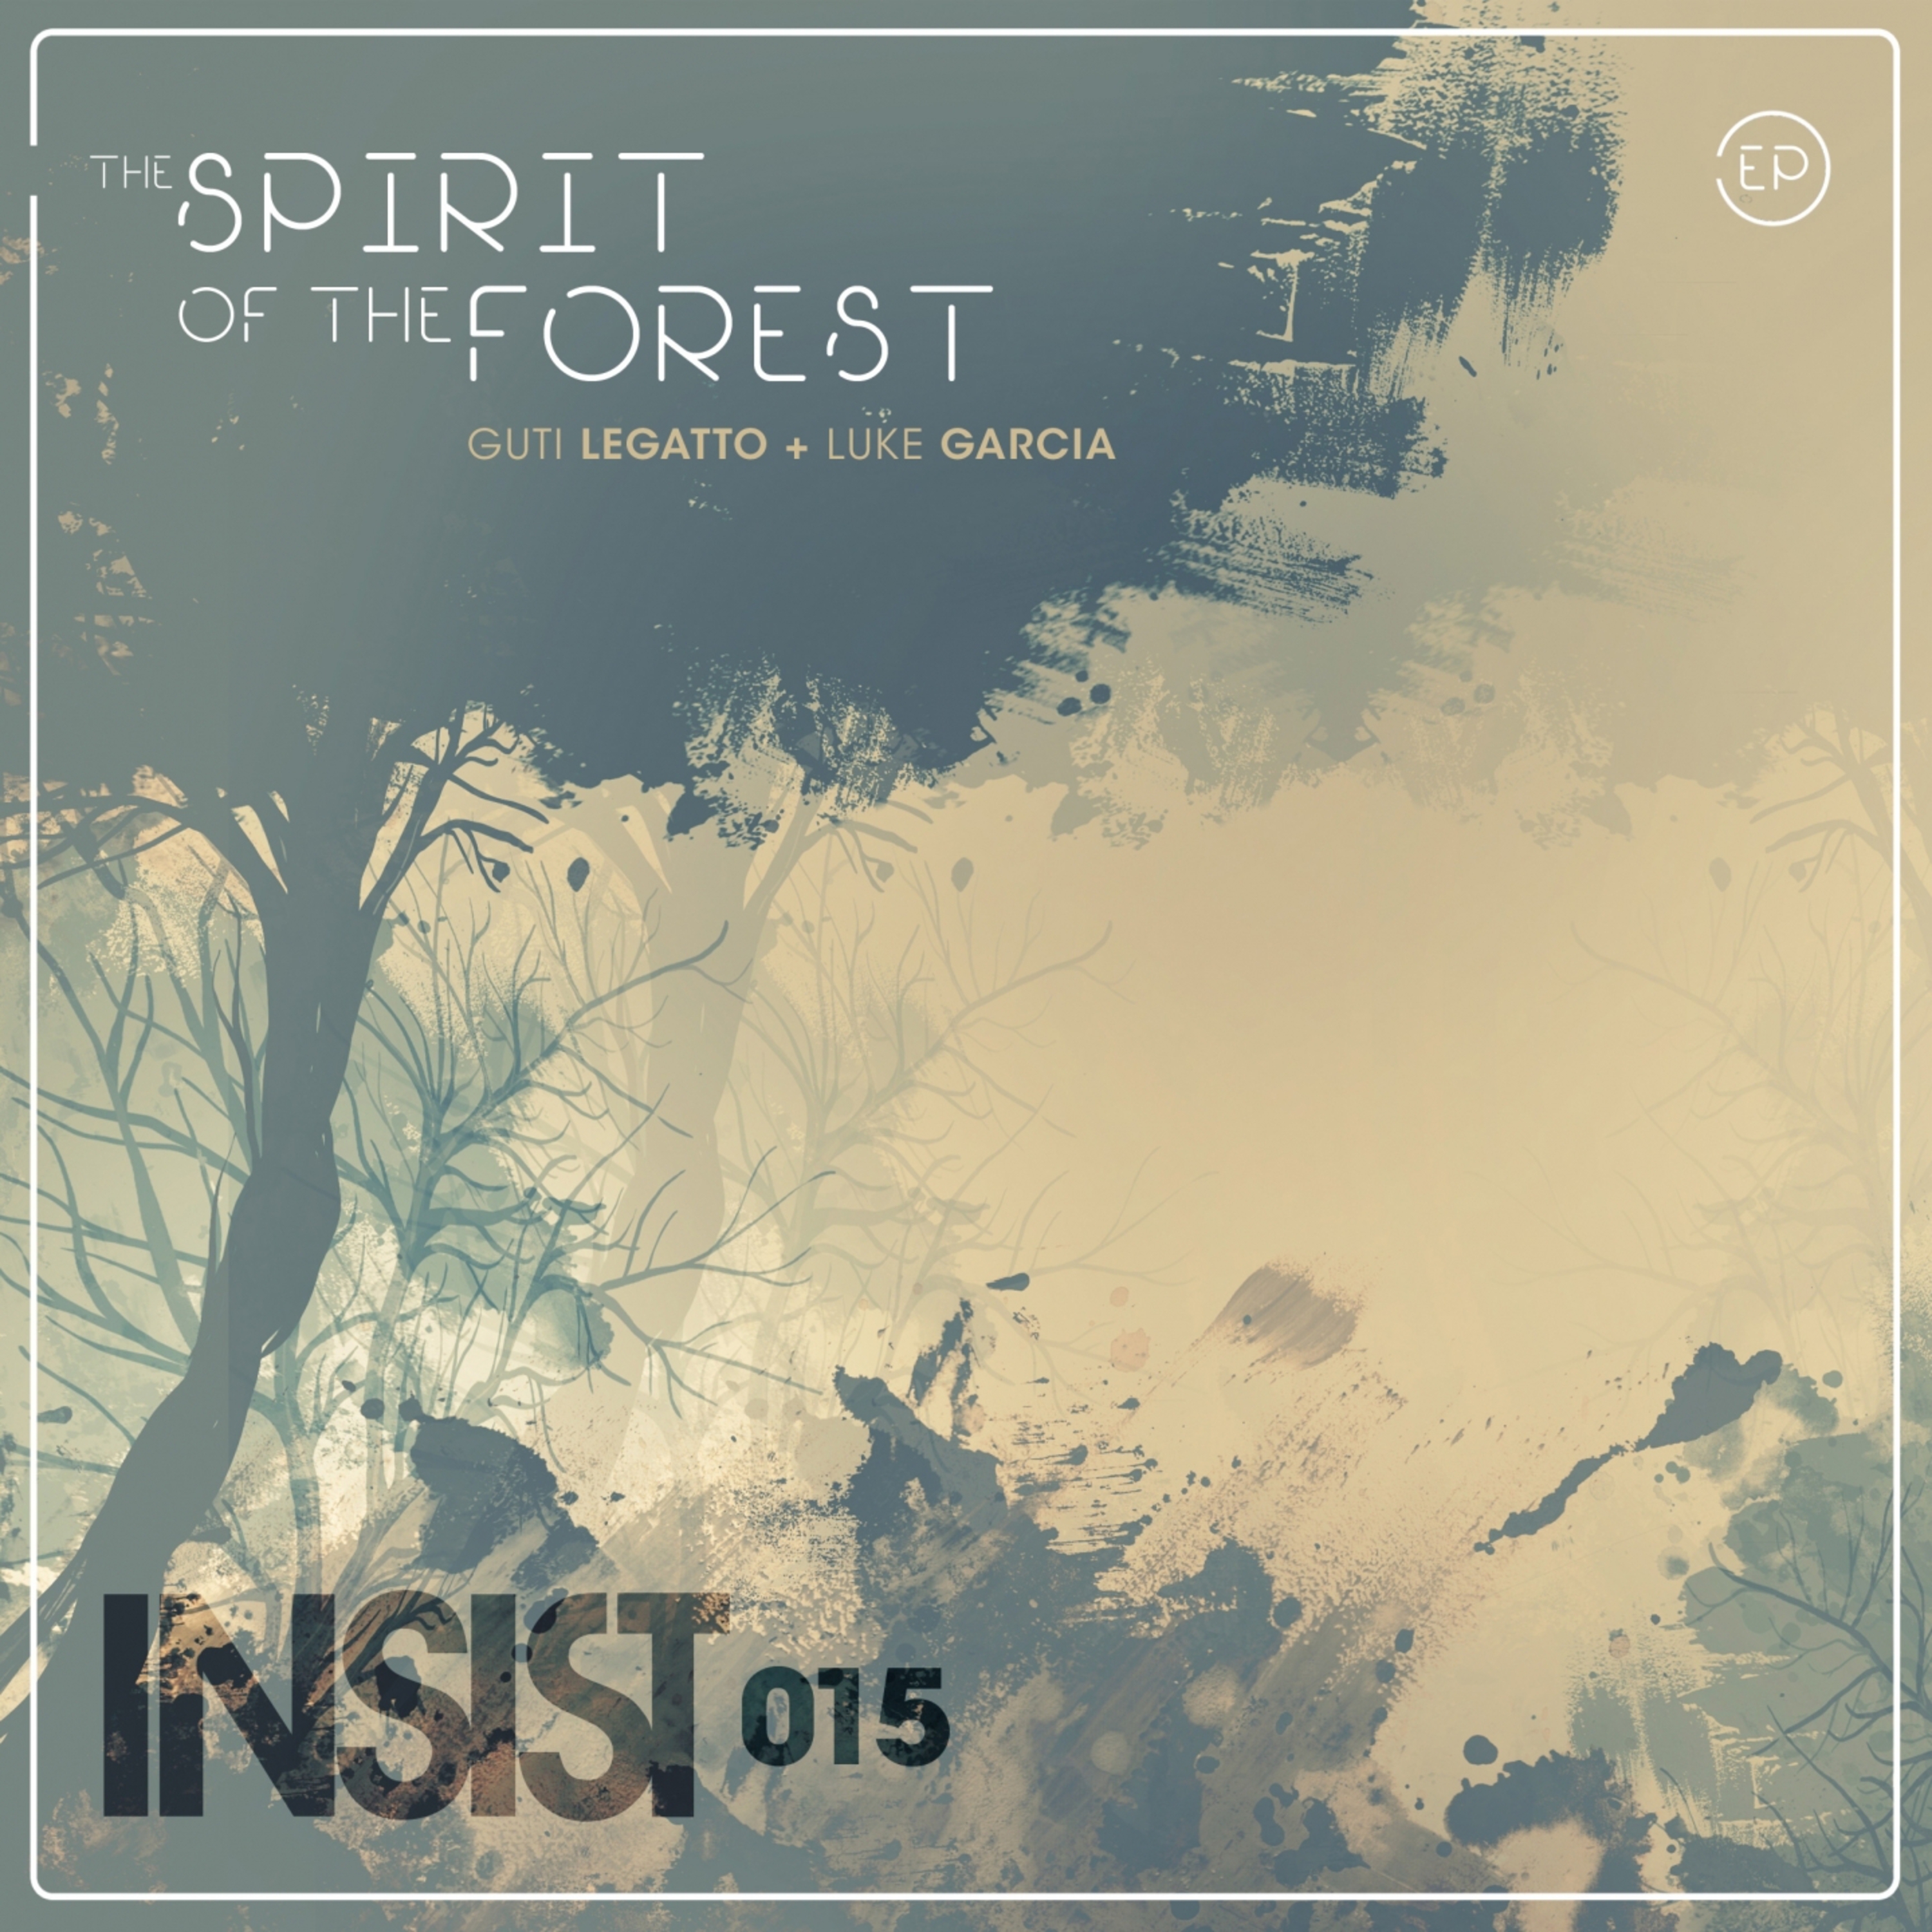 The Spirit of the Forest